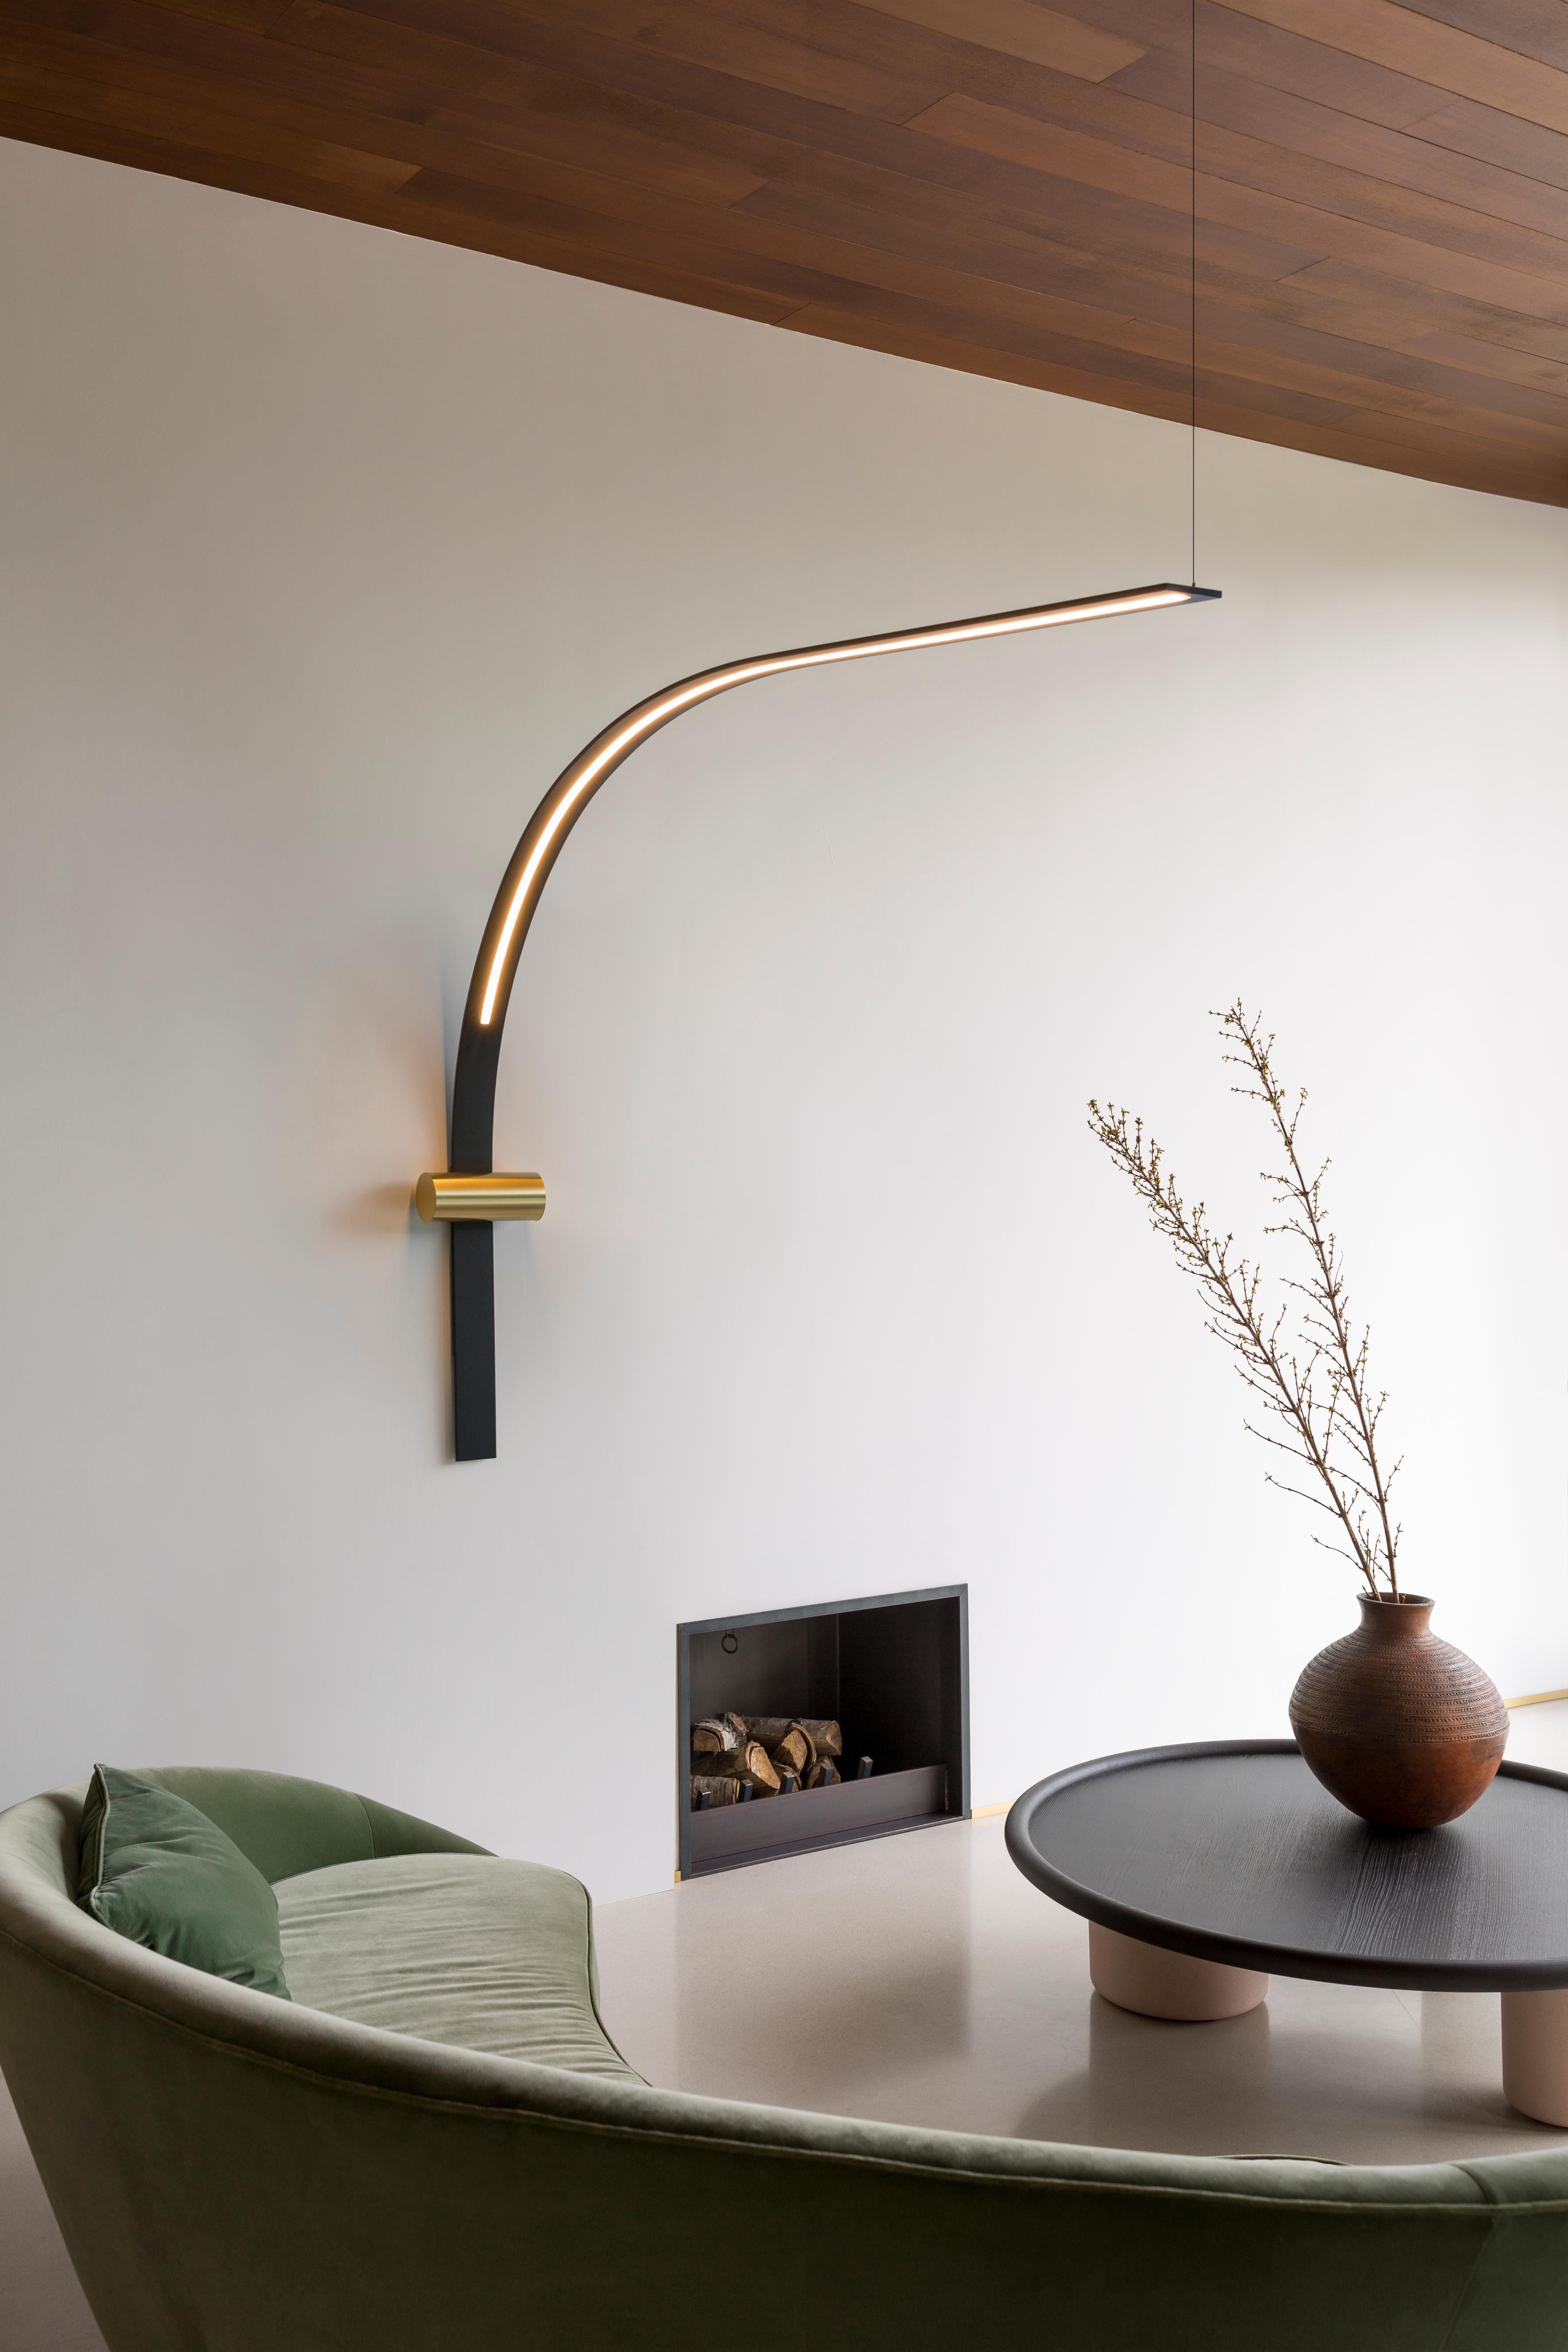 Wall Lamp Nastro 563.47 by TOOY
Designer: Studiopepe

Model shown: Sand black hardware + Brushed brass cylinder
Dimensions: H. 130 x W. 193 x D. 25 cm
Source light: 1 x LED 220/240V Compliant with US electric system

The Nastro wall lamps sees an